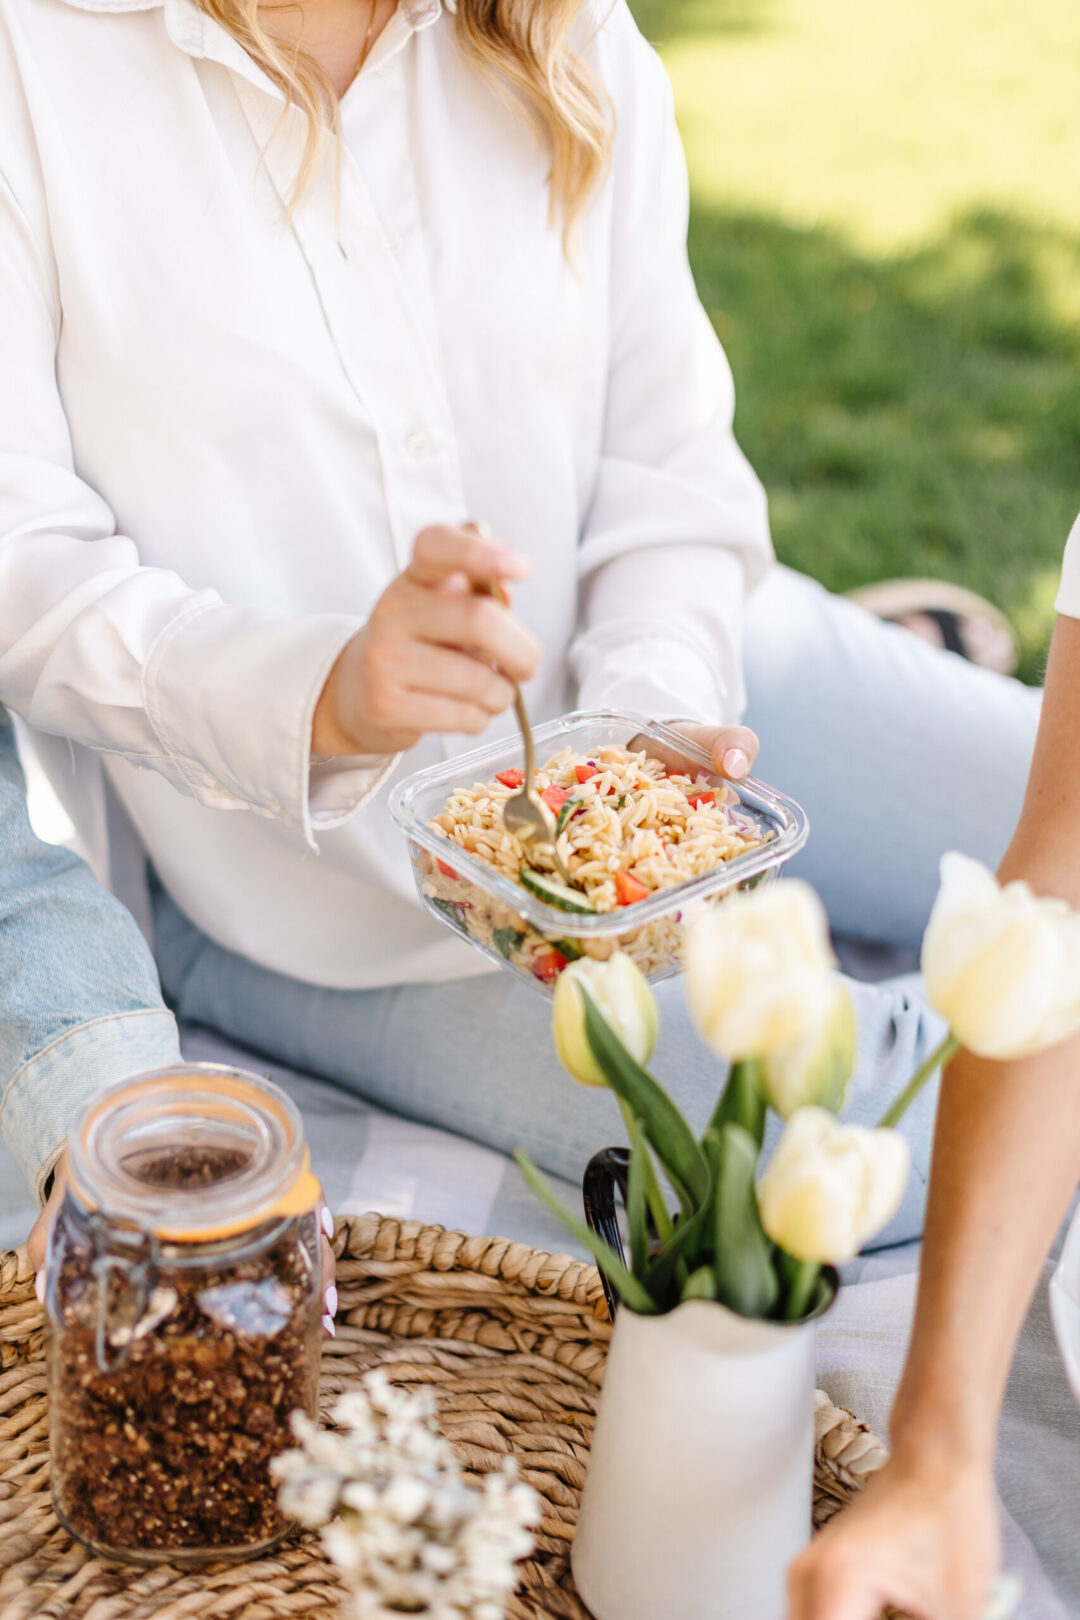 Girl in white blouse holding glass bowl of orzo salad on a picnic blanket with some flowers on it.